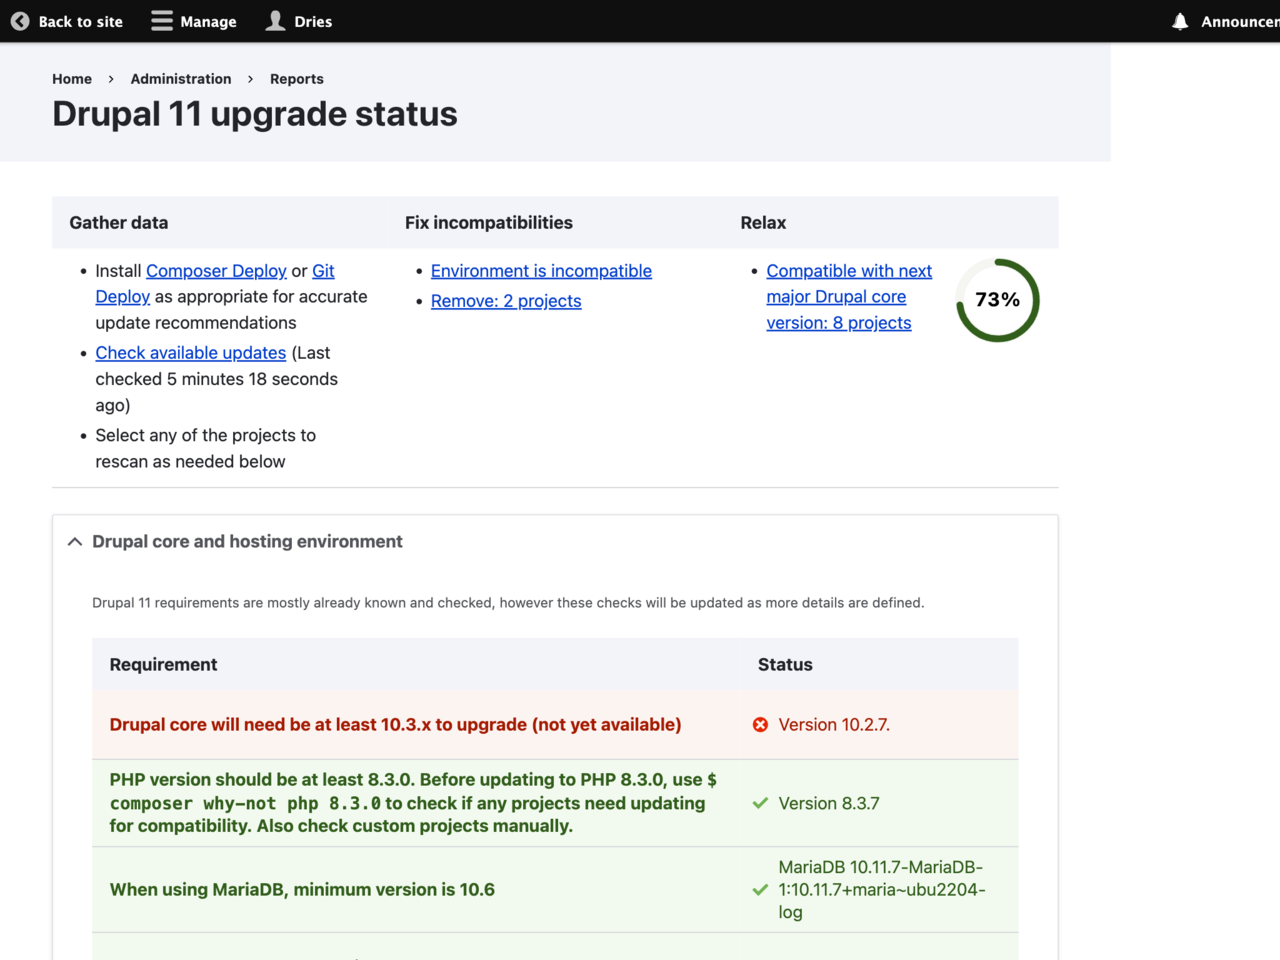 Screenshot of Drupal 11 upgrade status report in the administration interface.